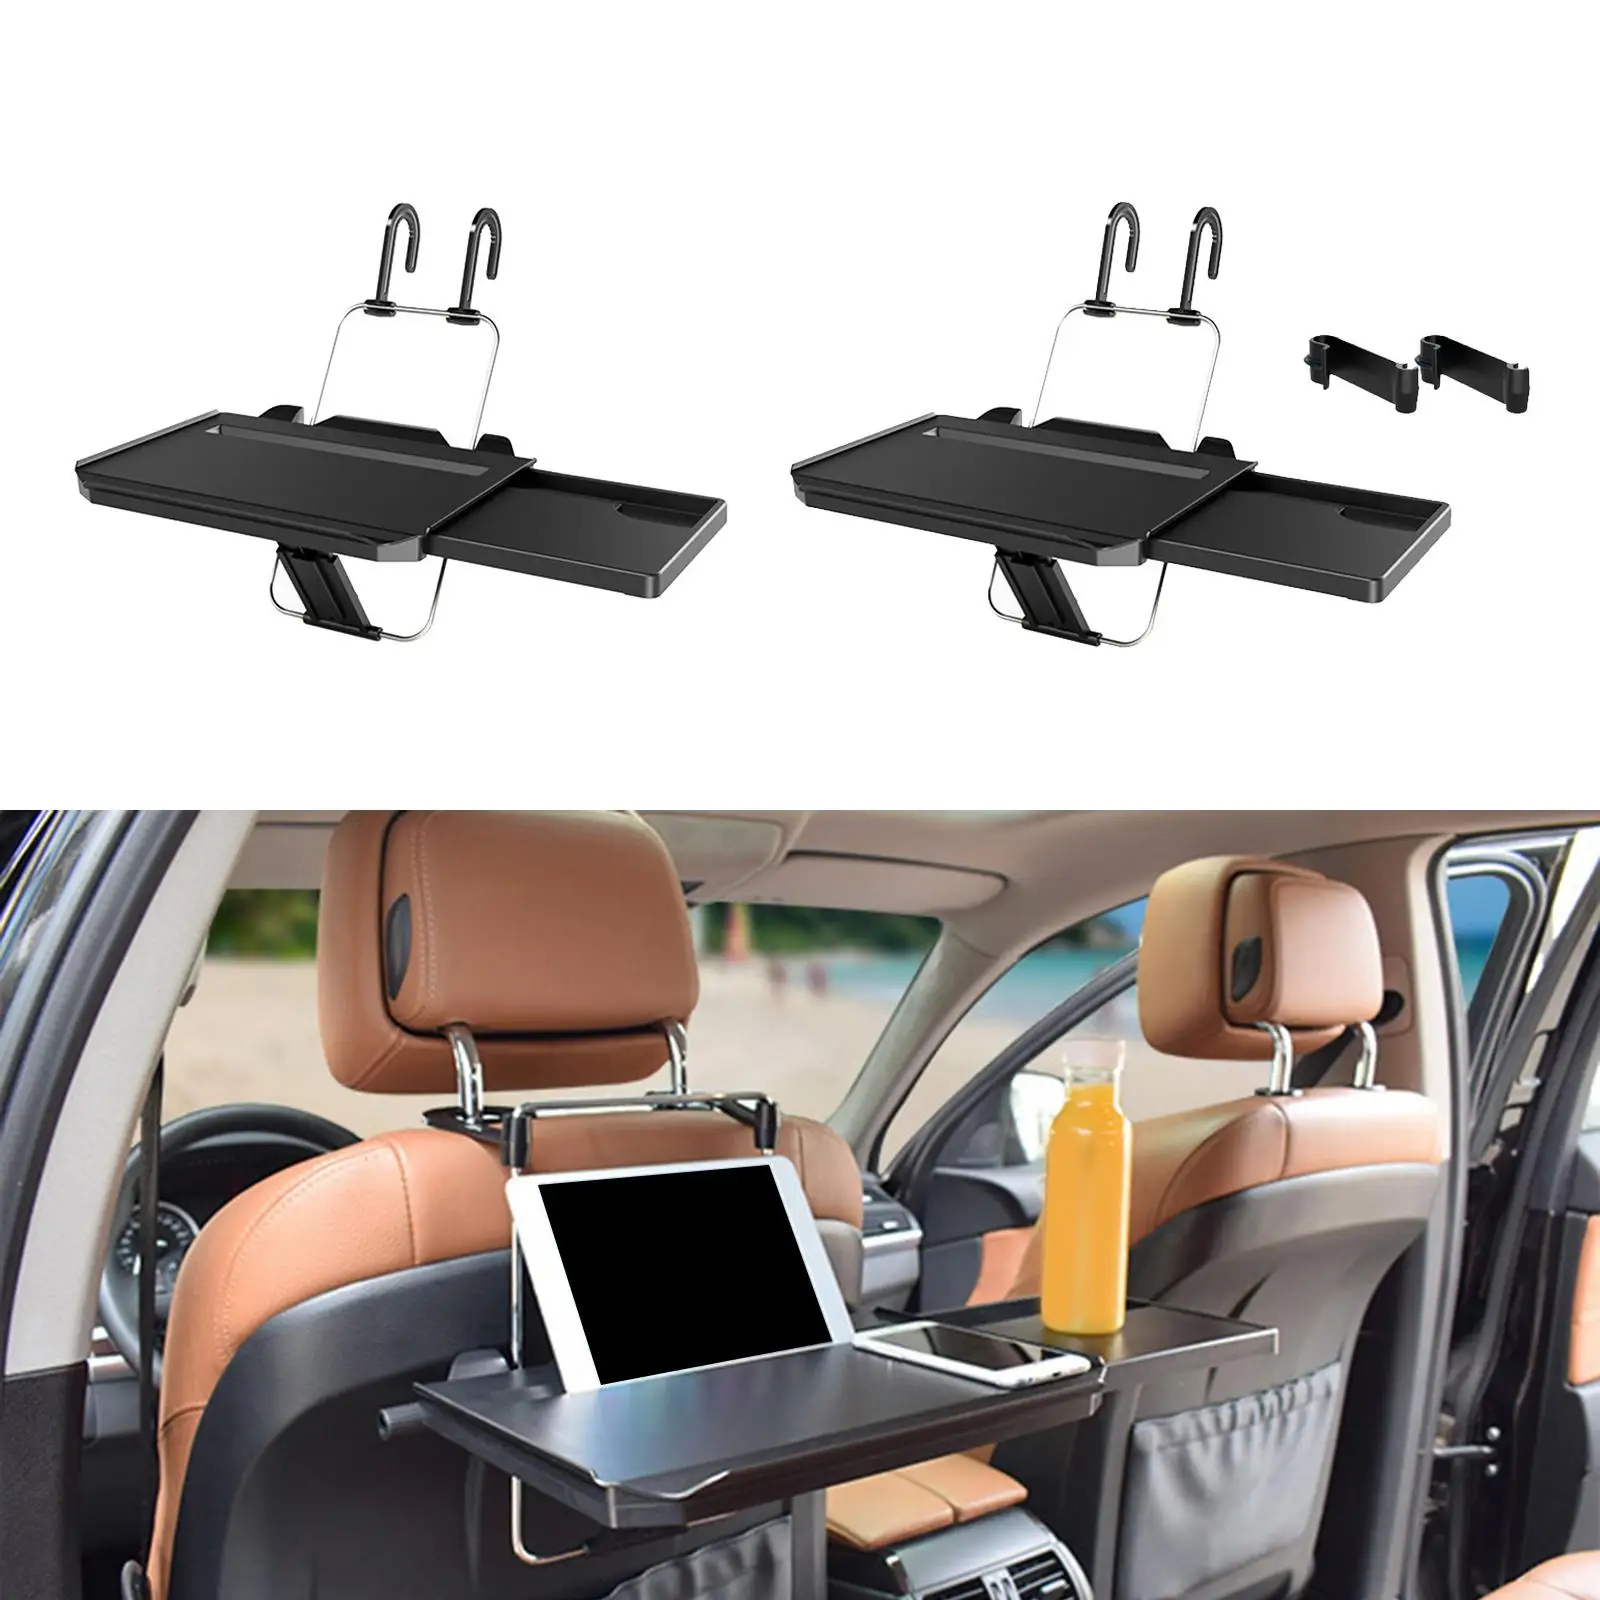 2 in 1 Car Steering Table Removable Organizers Portable Foldable